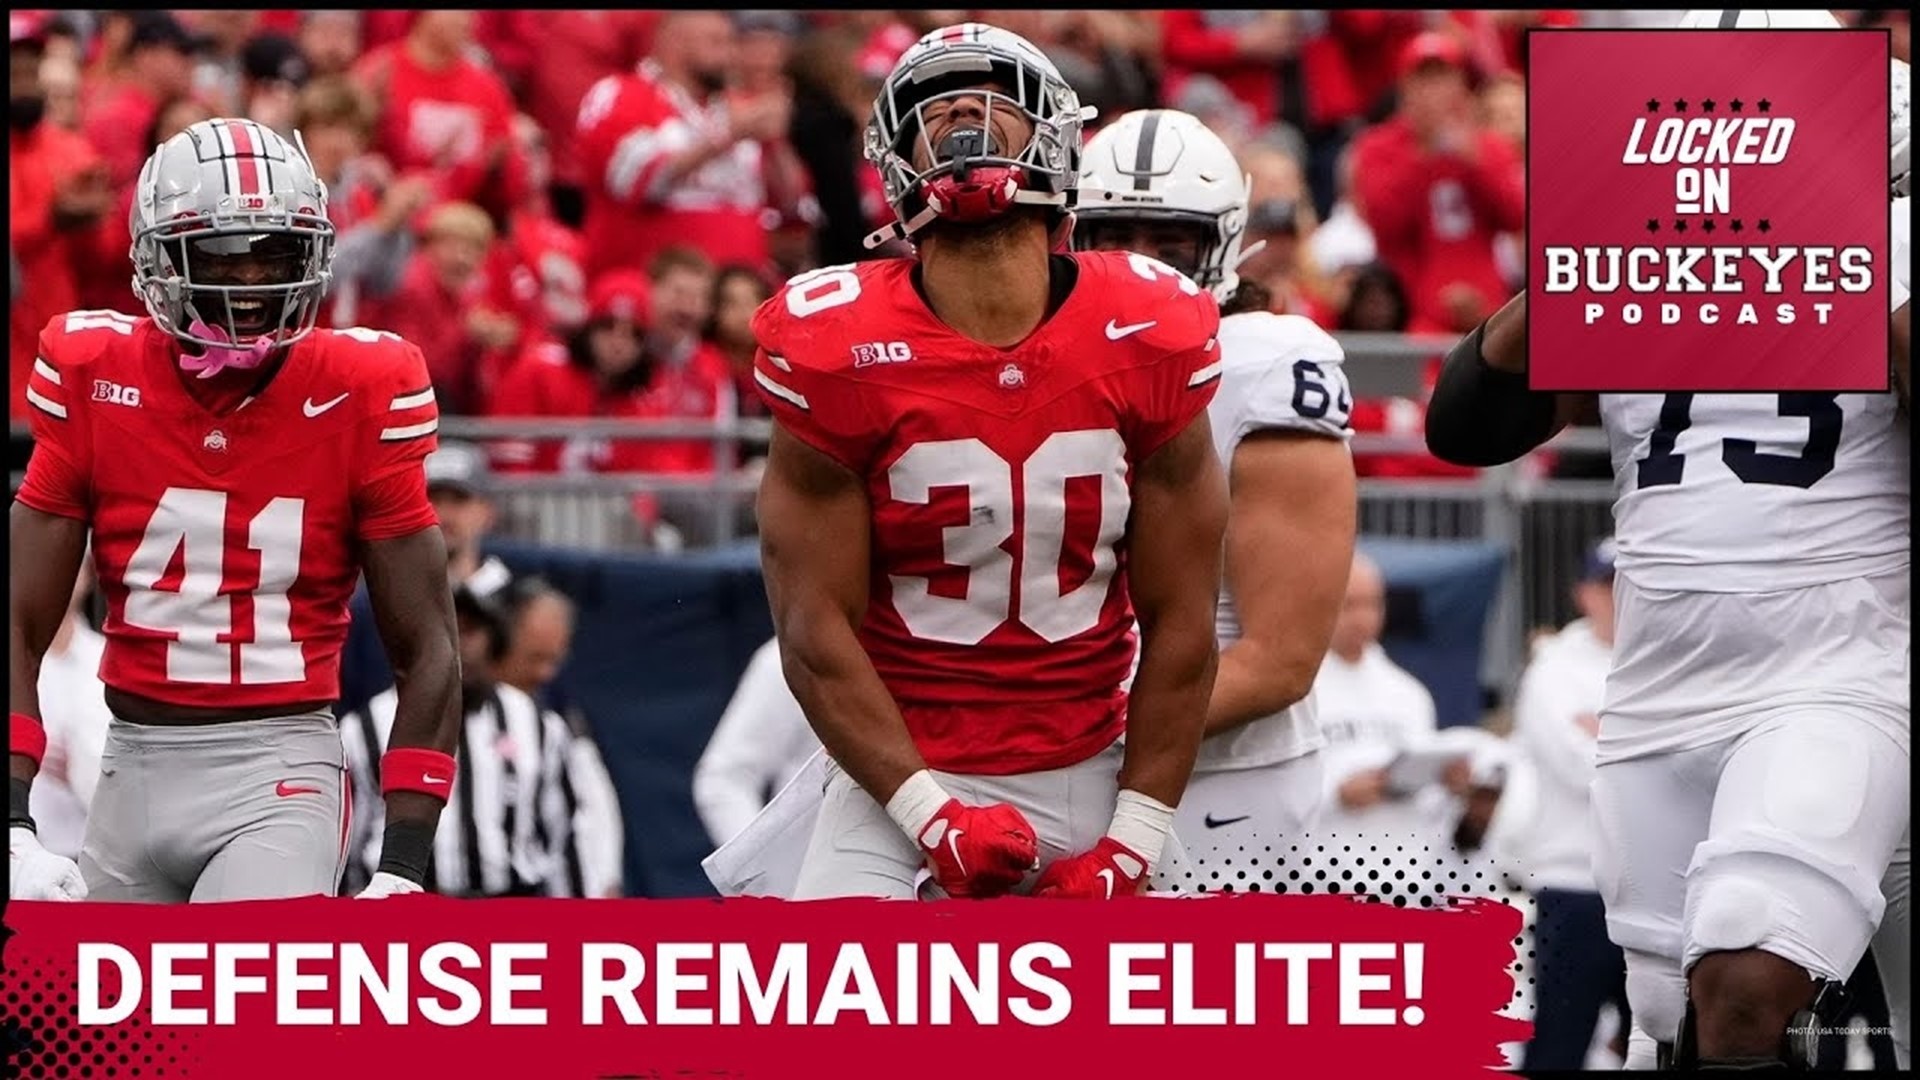 Have you taken a look at how elite Ohio State's defense has been this year?  Well, Jay Stephens does that for you during today's show.